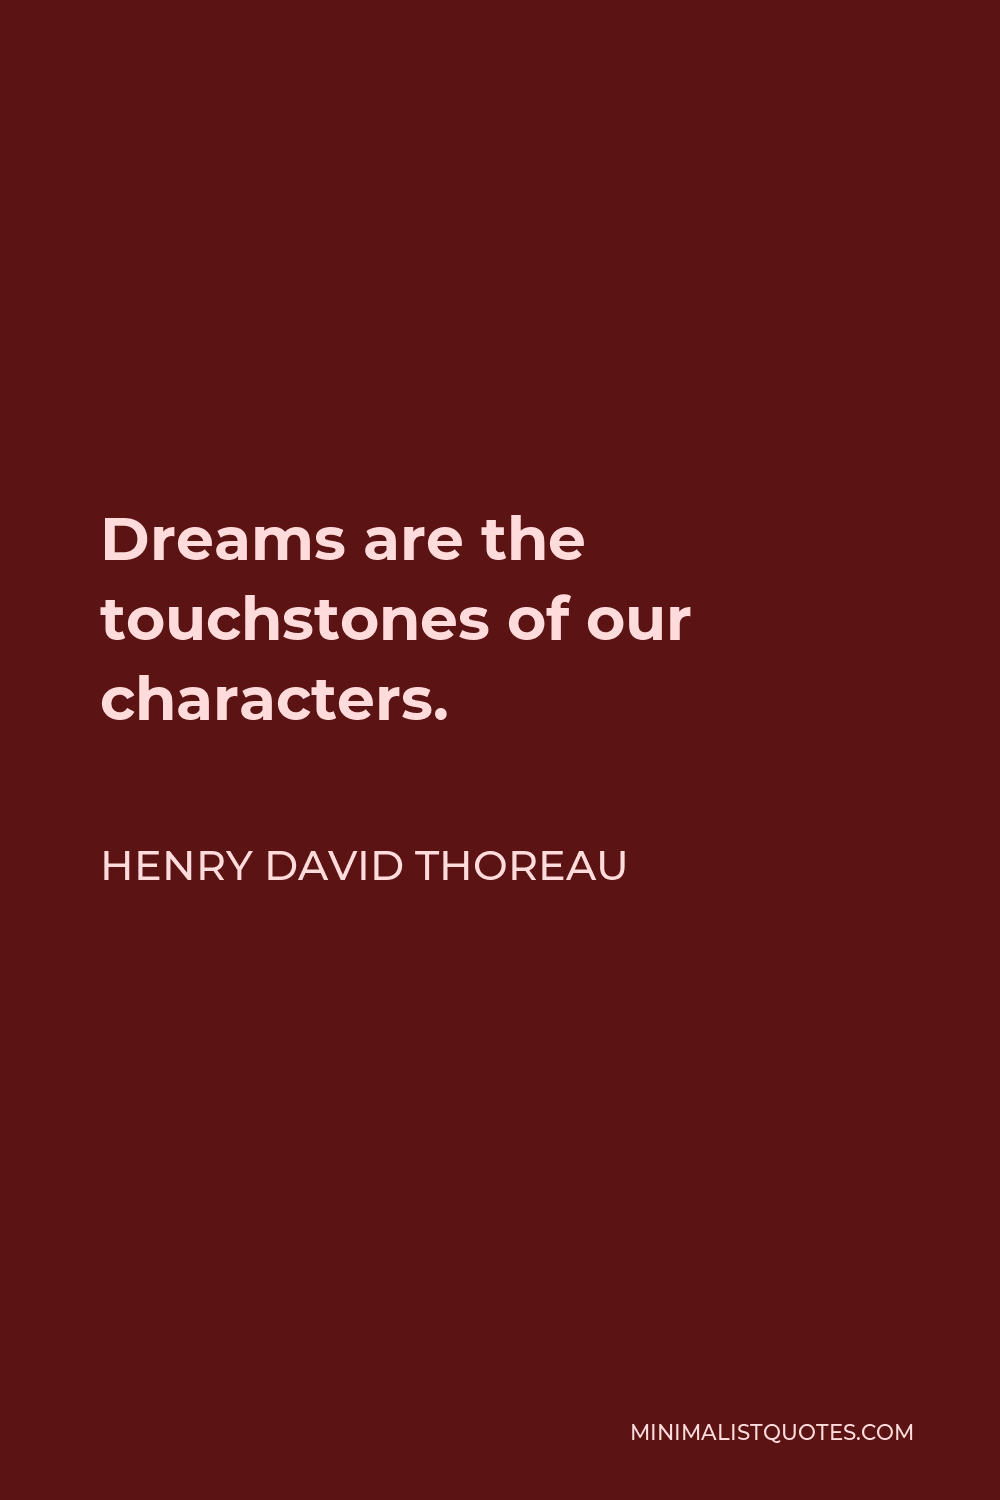 Henry David Thoreau Quote - Dreams are the touchstones of our characters.